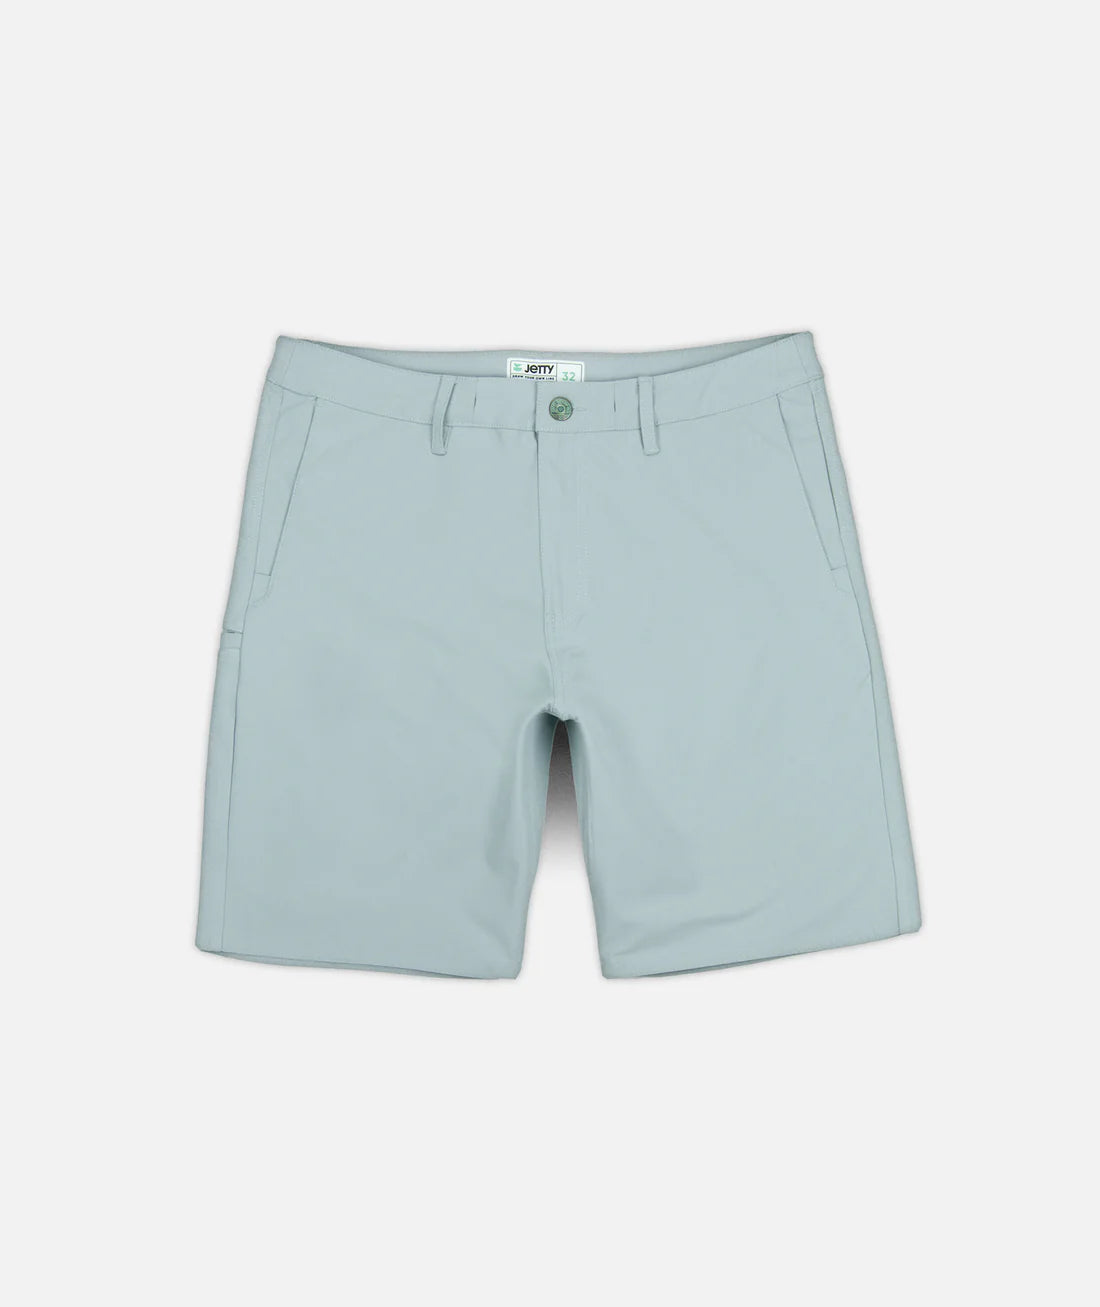 Jetty's Acadia Versatility Short in the color Slate